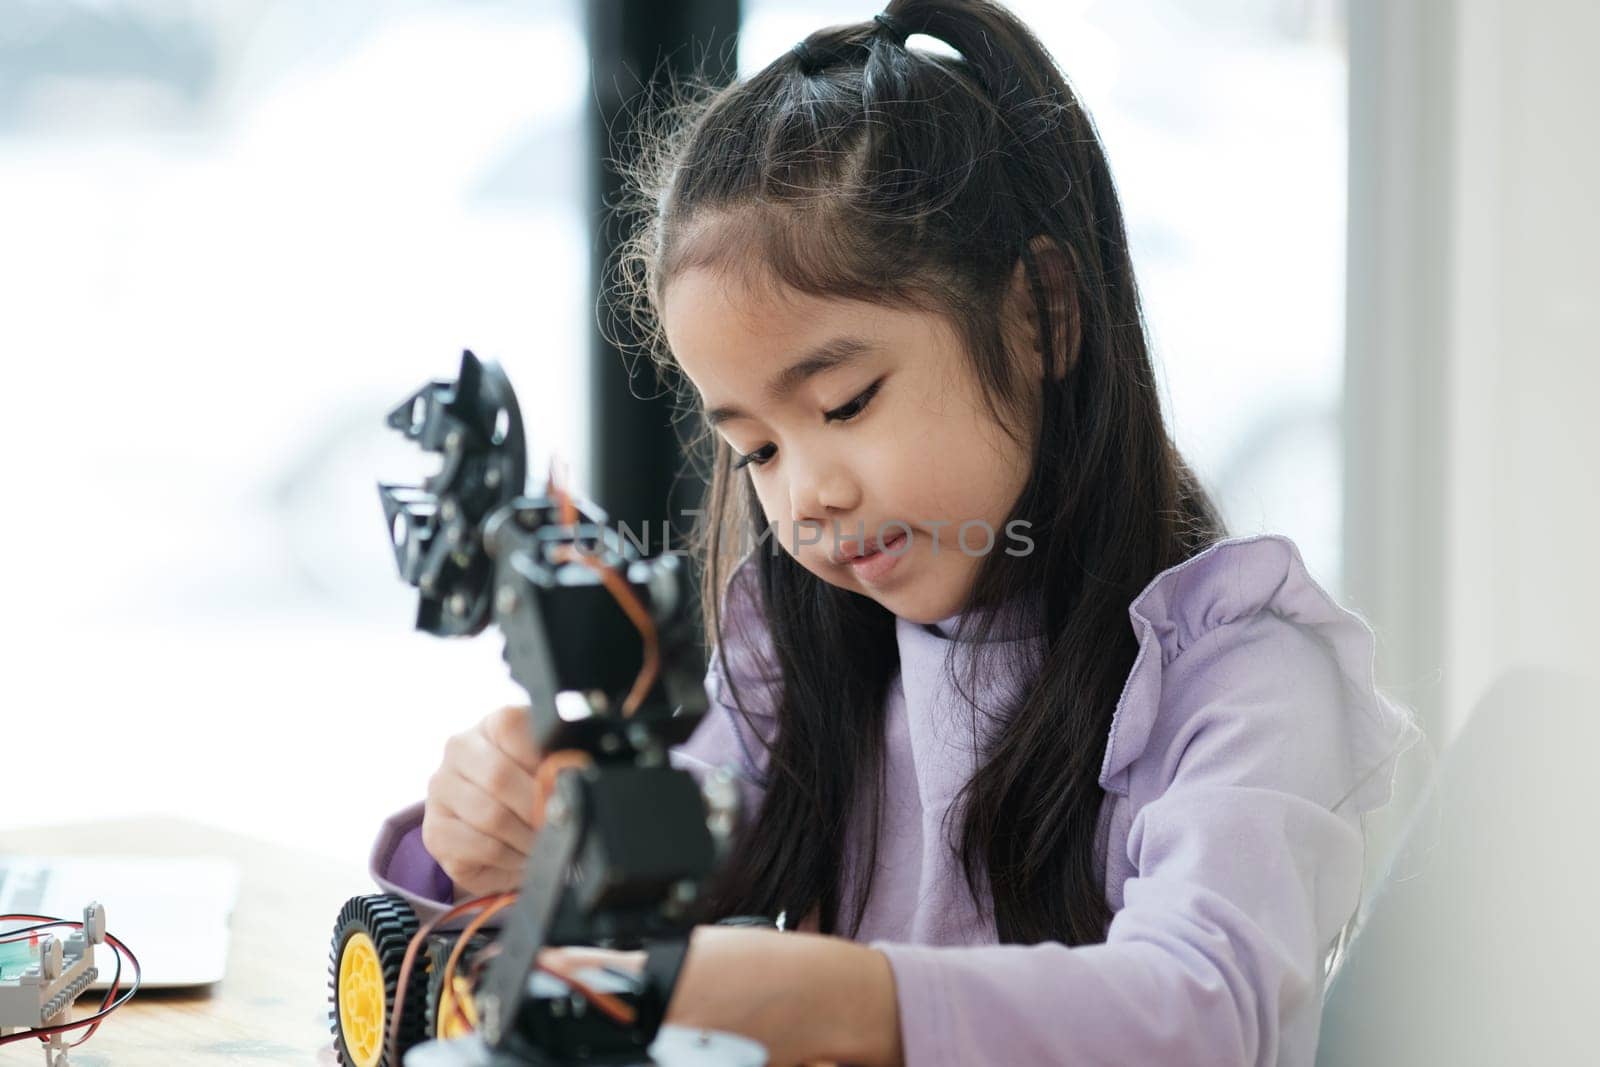 Asian girl concentrating on building a robot, embodying STEM education.